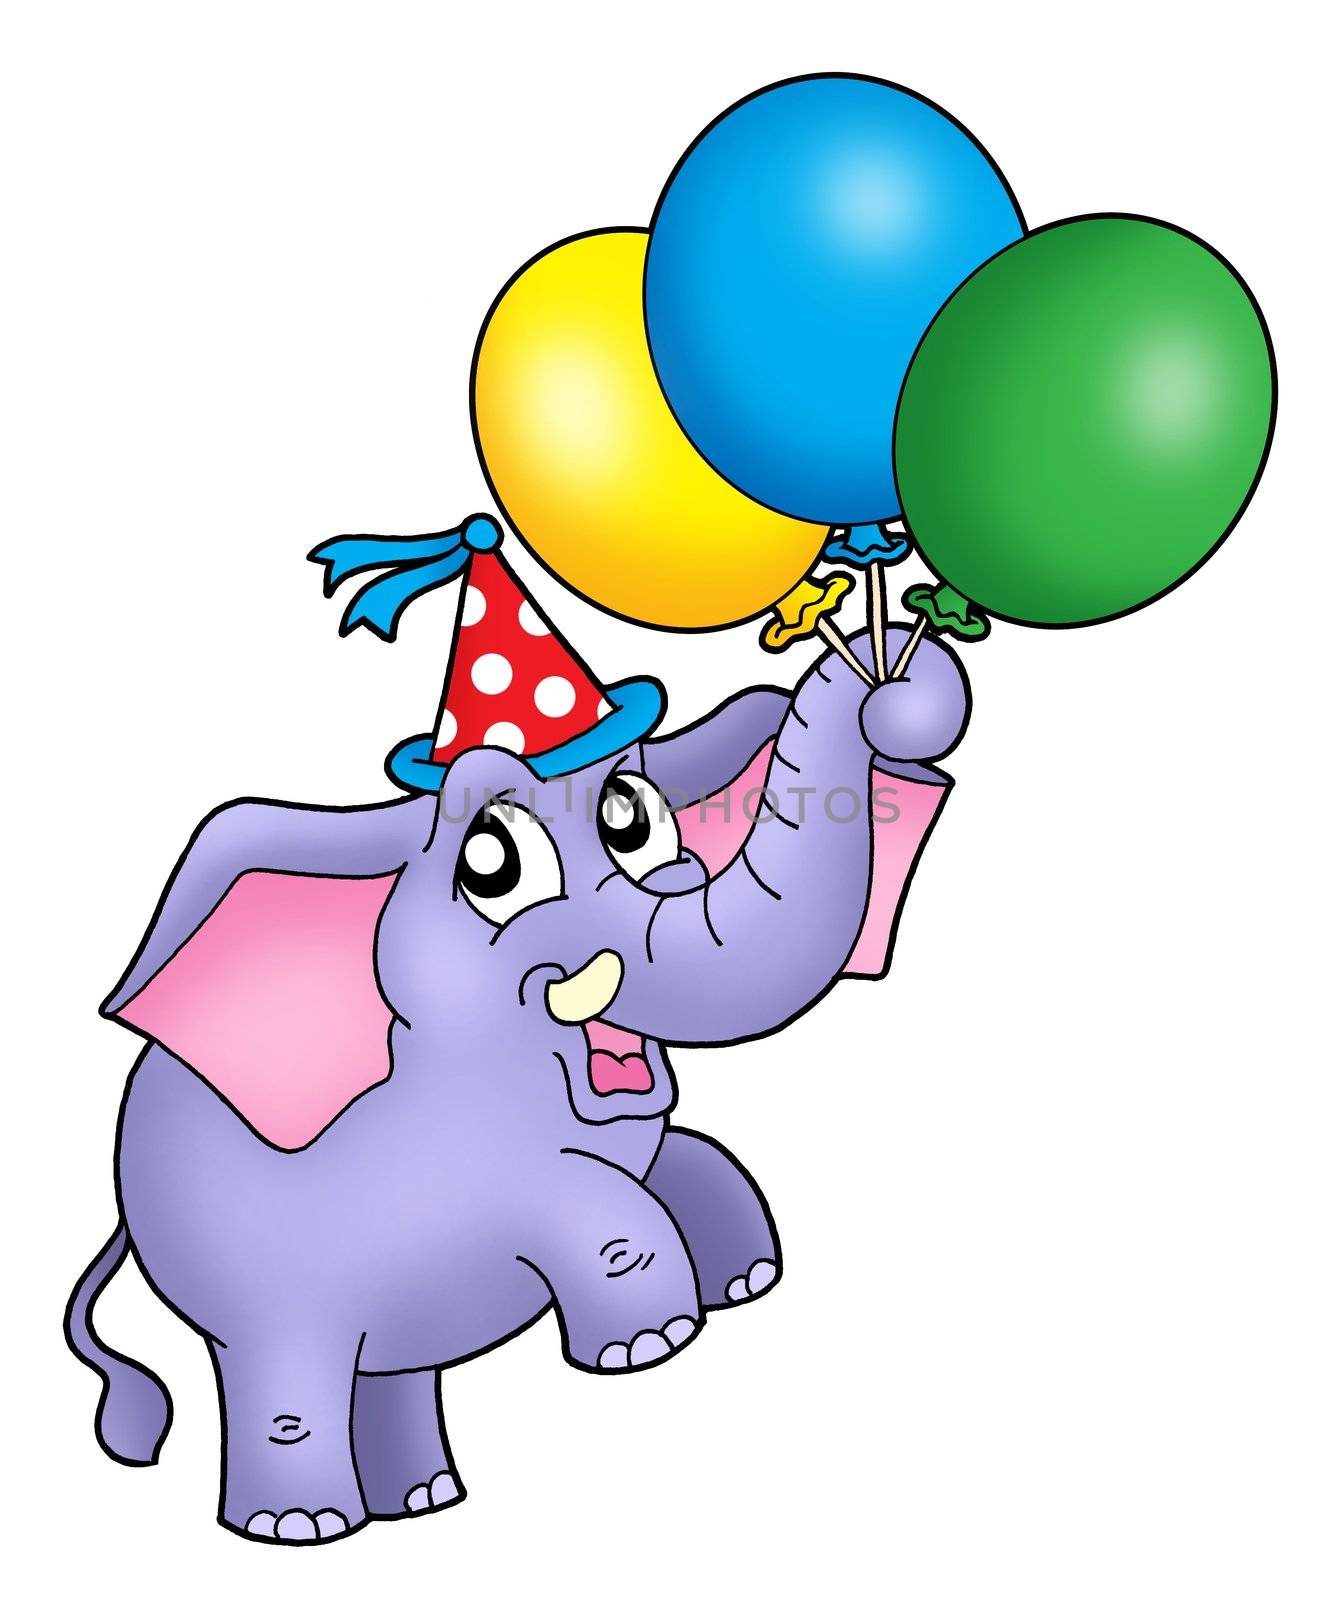 Small elephant with balloons by clairev